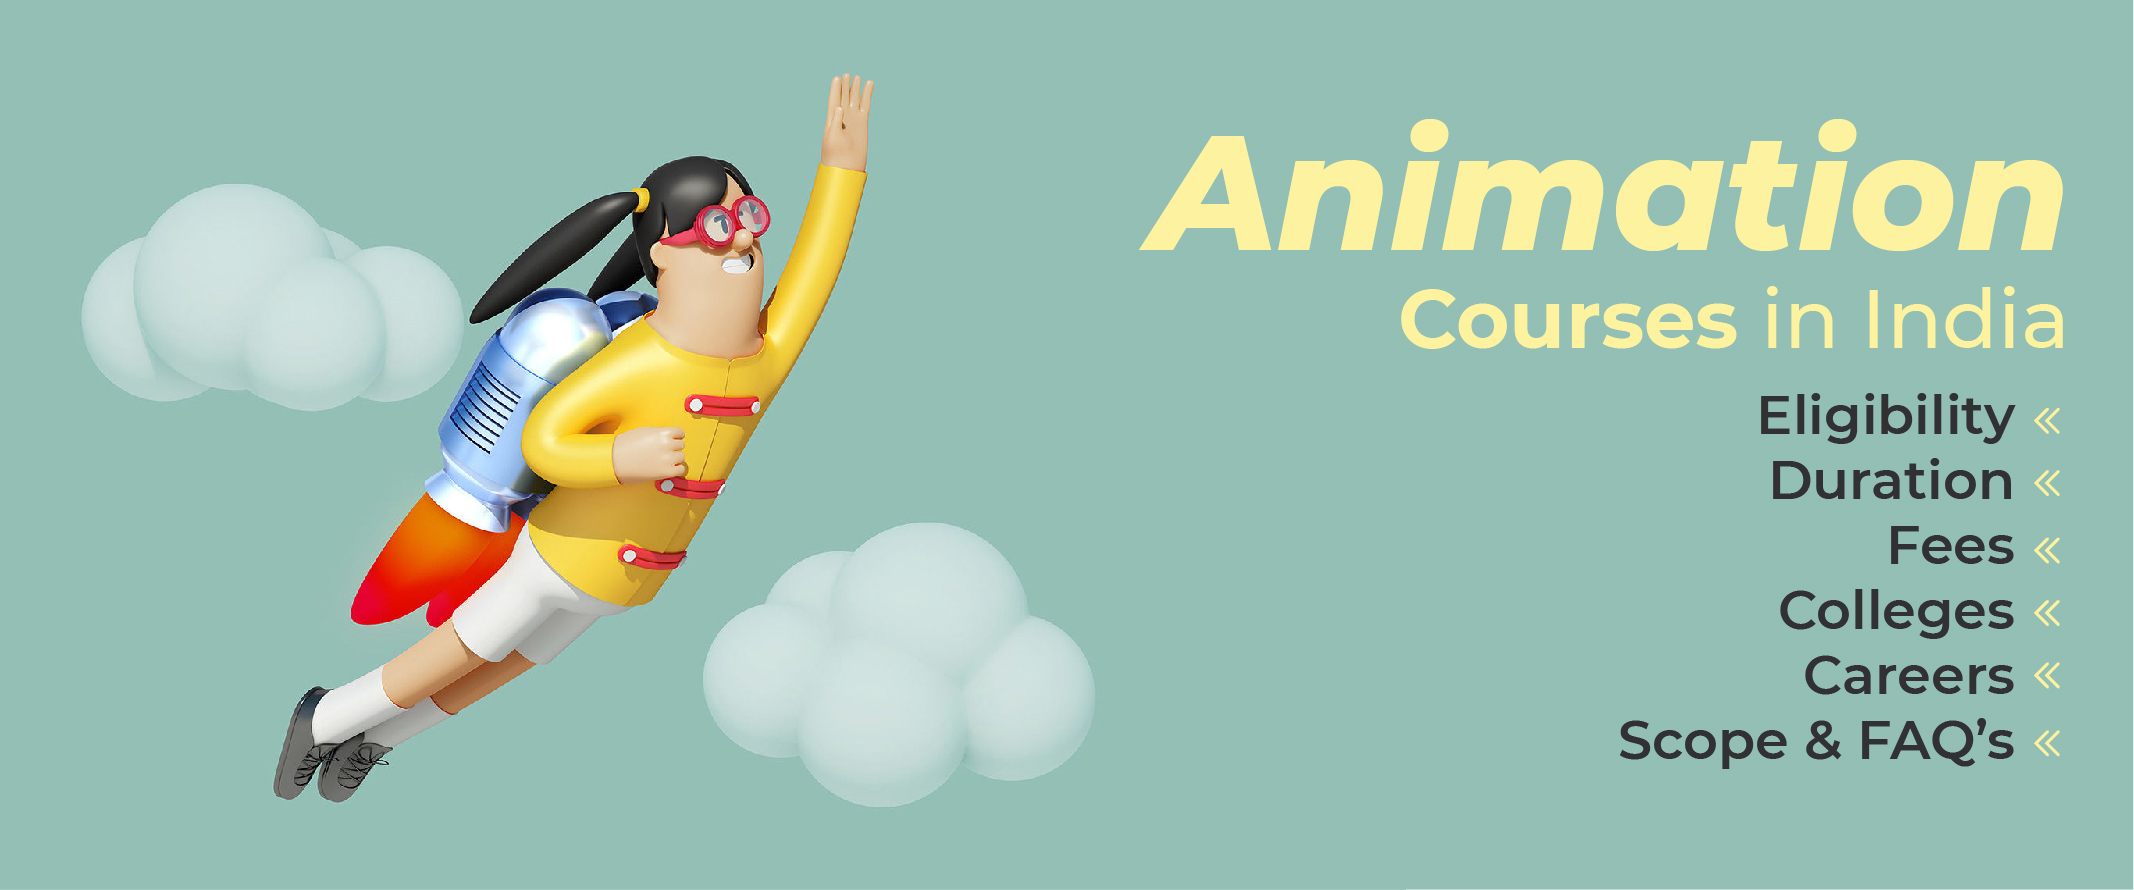 Animation Courses in India: Eligibility, Duration, Fees